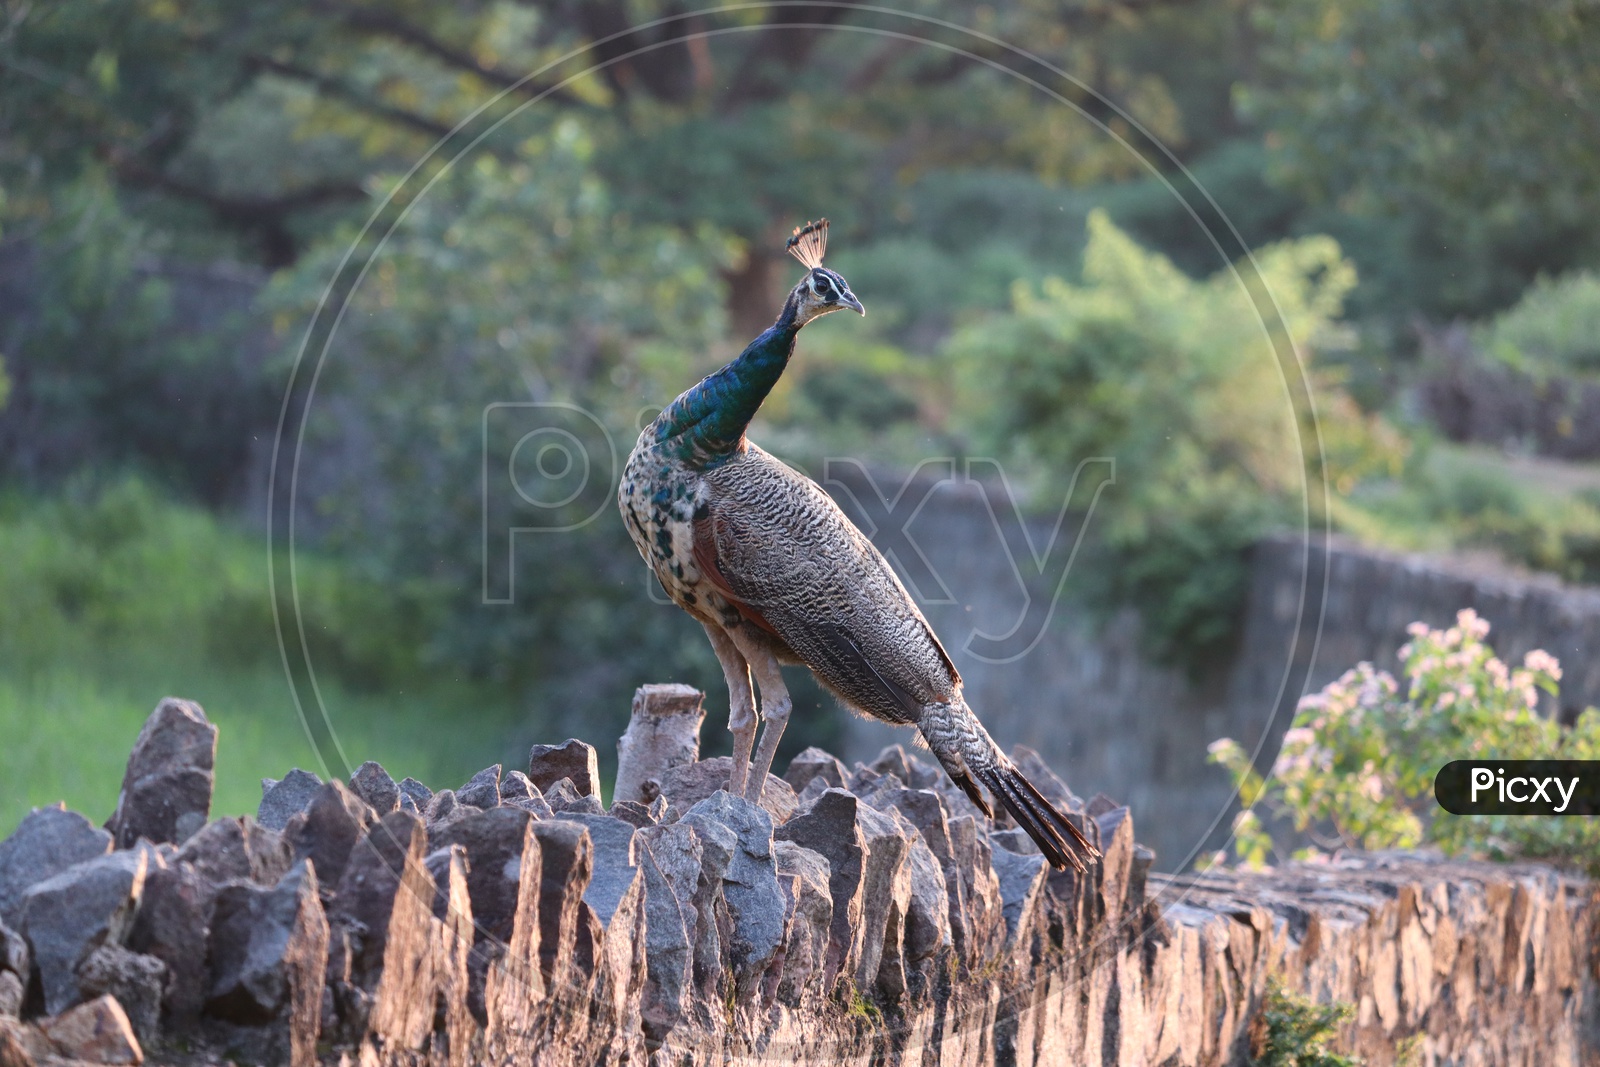 The royal beauty of the jungle. Peacock bird. Peacock or male peafowl with extravagant plumage. Beautiful peacock with eyespotted tail feathers. Wild peacock walking on green grass